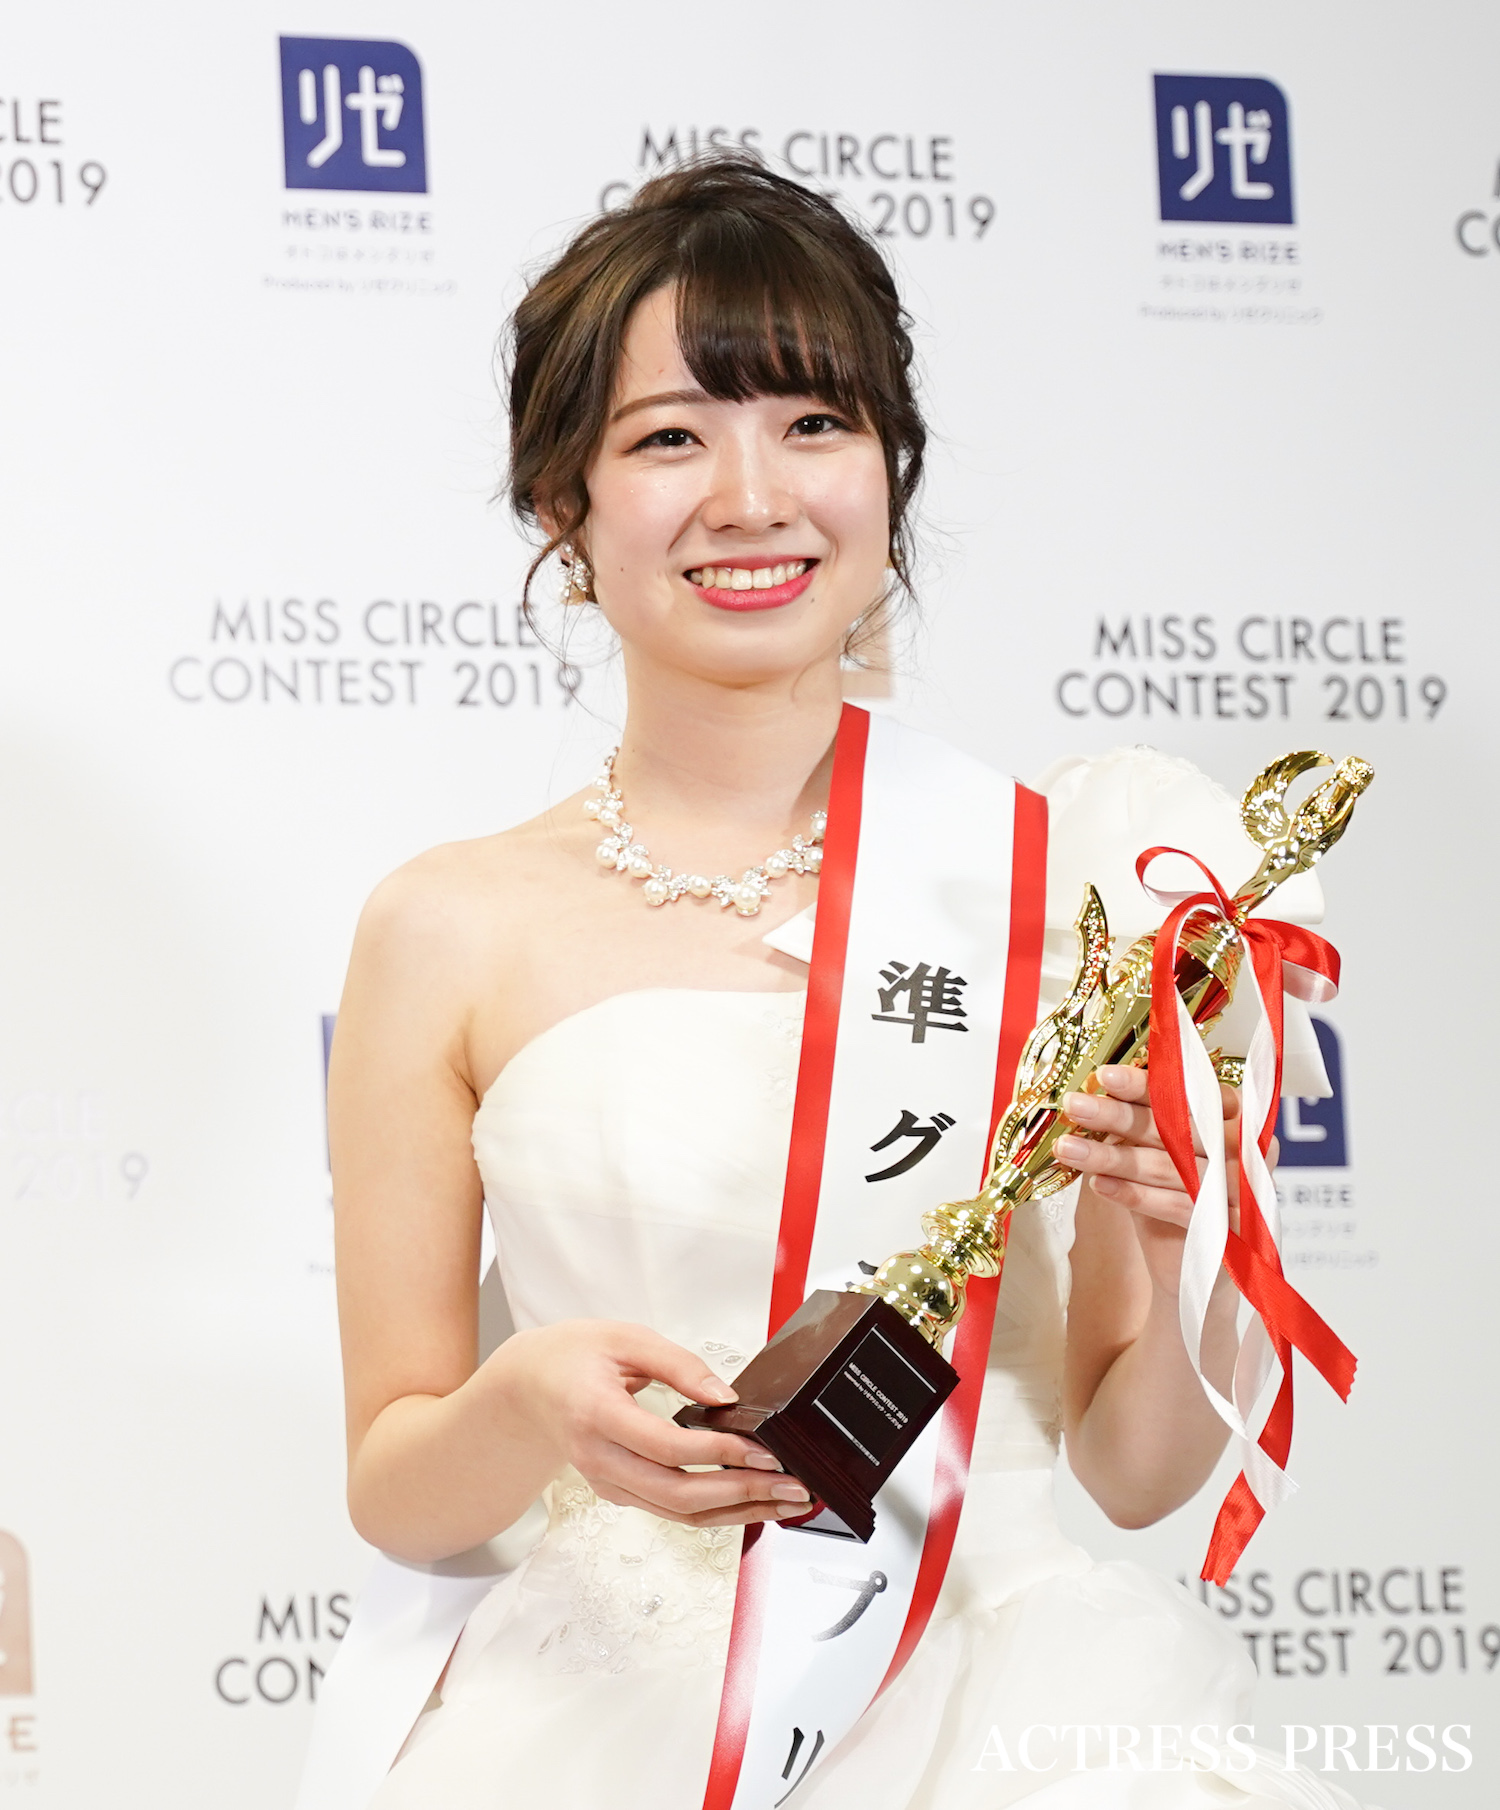 「MISS CIRCLE CONTEST 2019」（ミスサークルコンテスト）受賞者